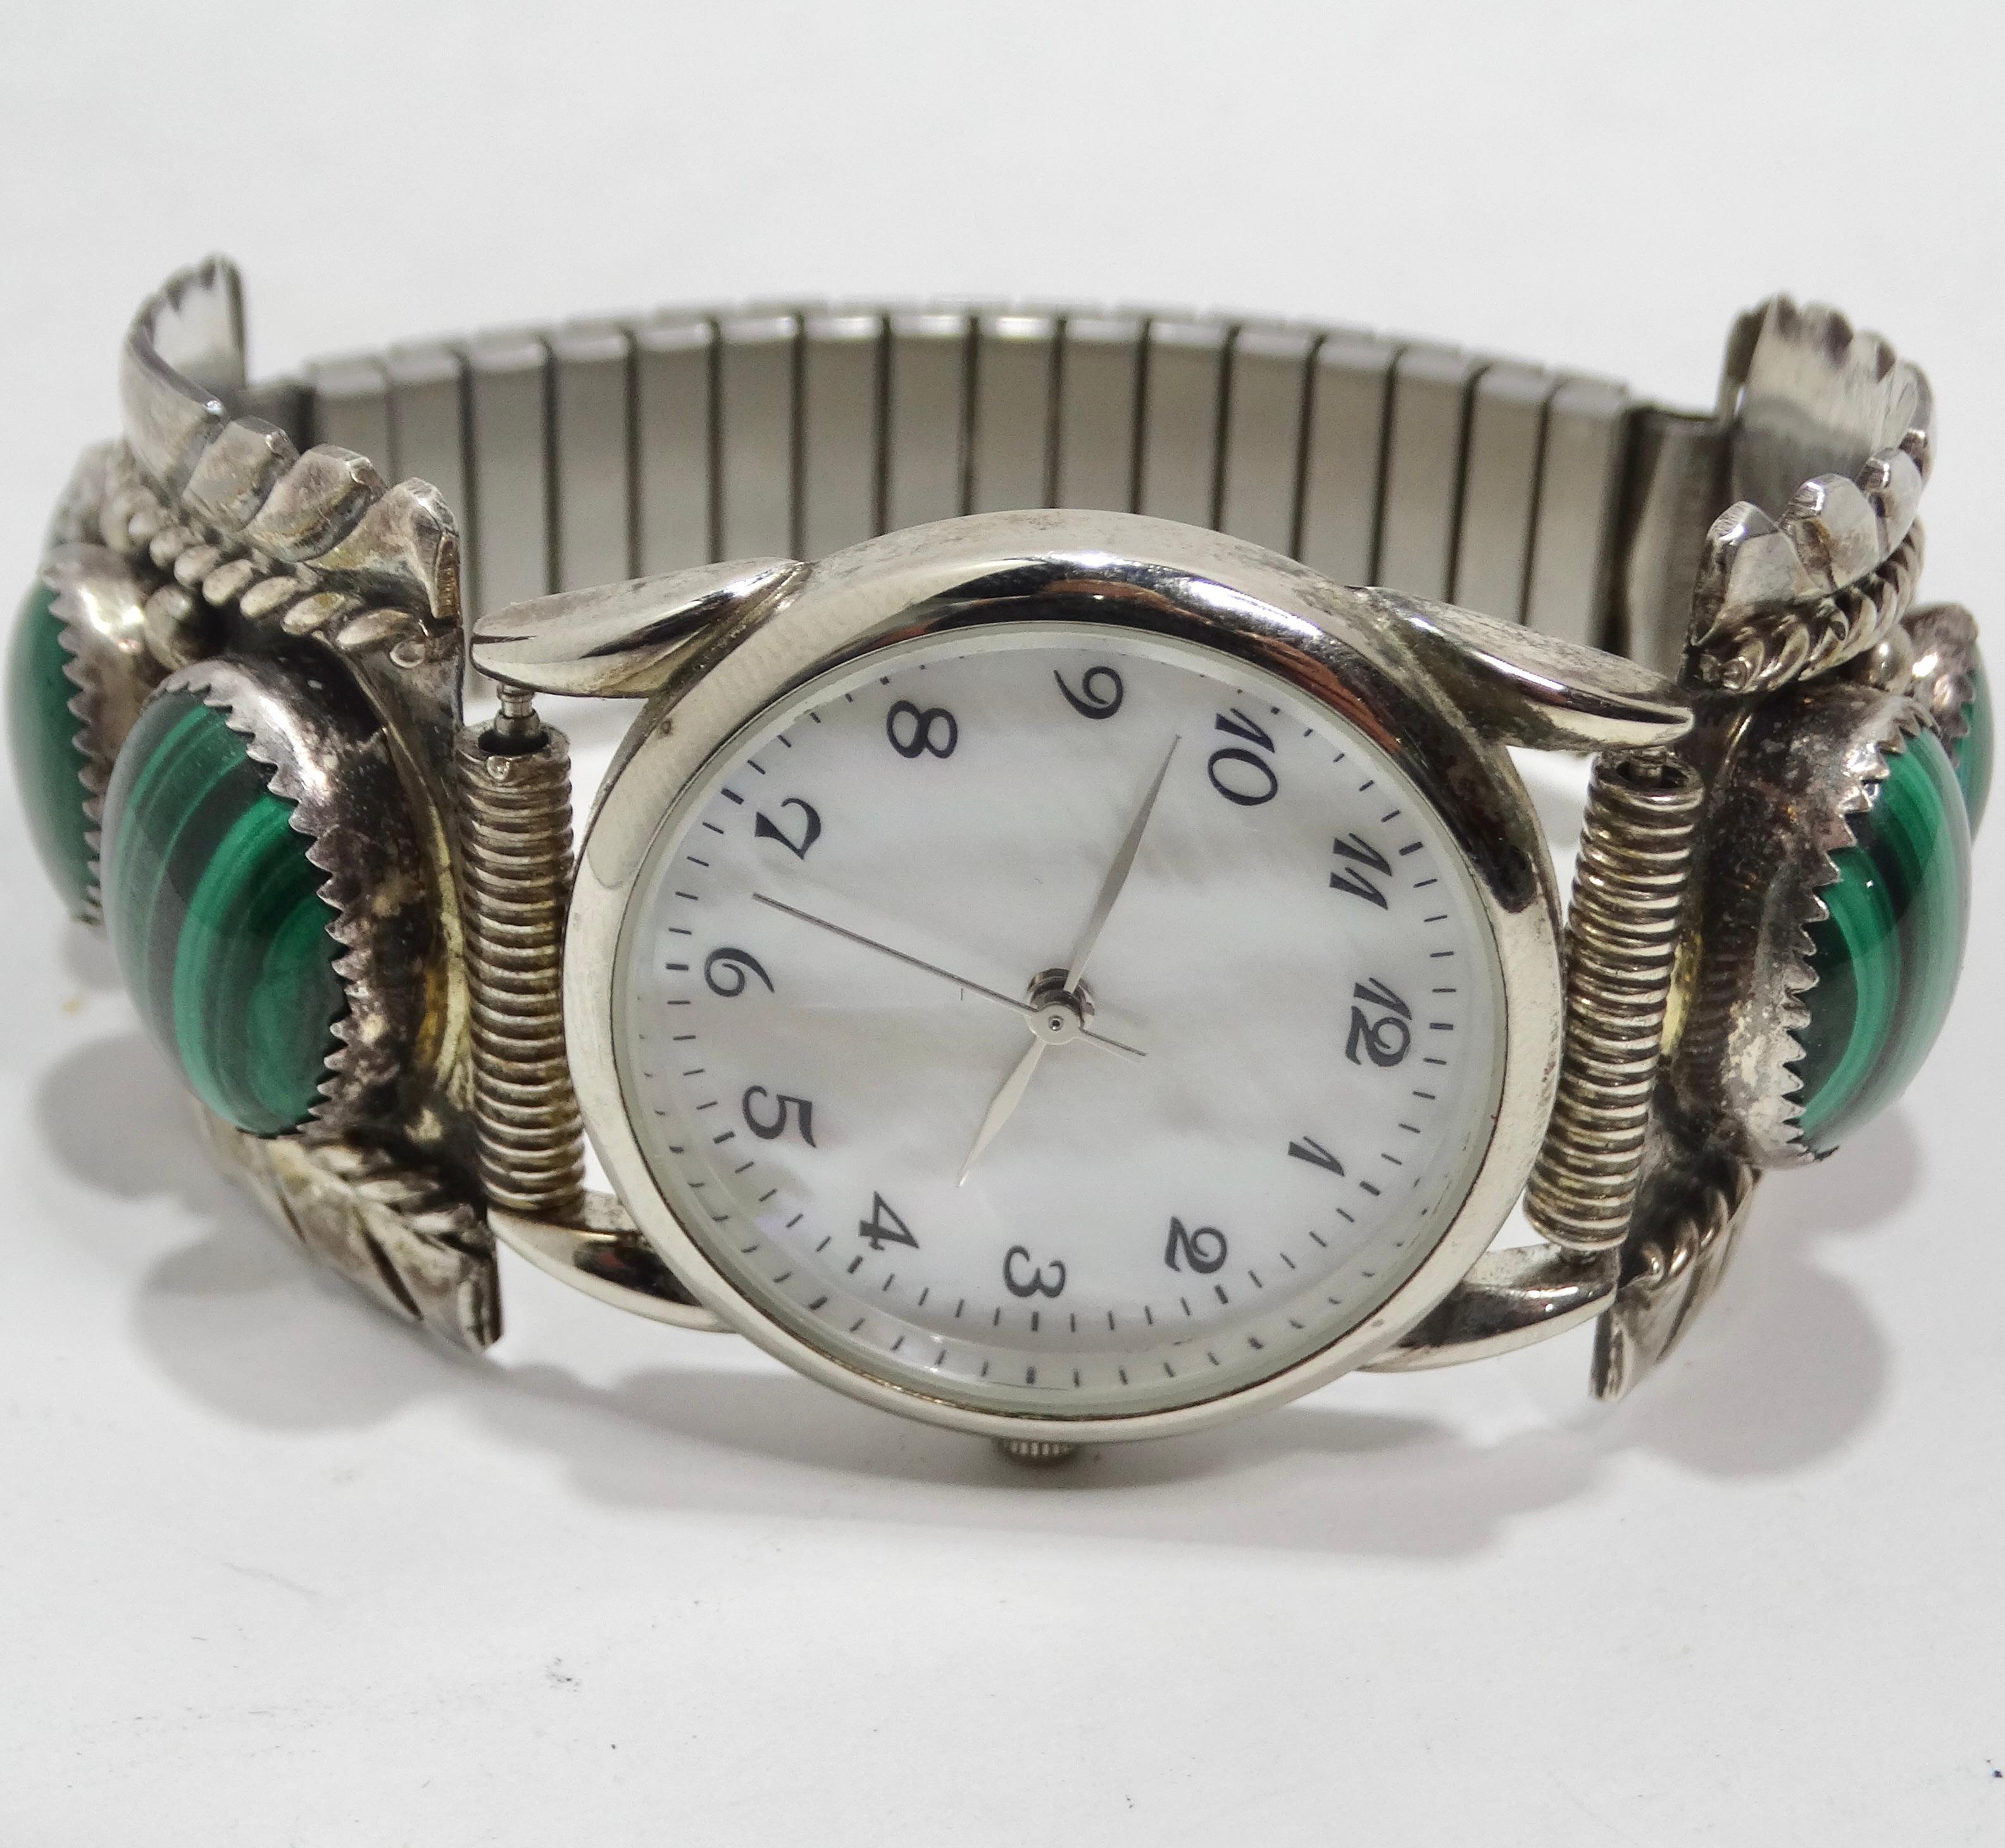 Introducing the 1970s Native American Silver Malachite Stone Watch—a breathtaking statement piece that transcends time and fashion. This watch isn't just a timekeeping accessory; it's a wearable work of art that exudes Native American craftsmanship